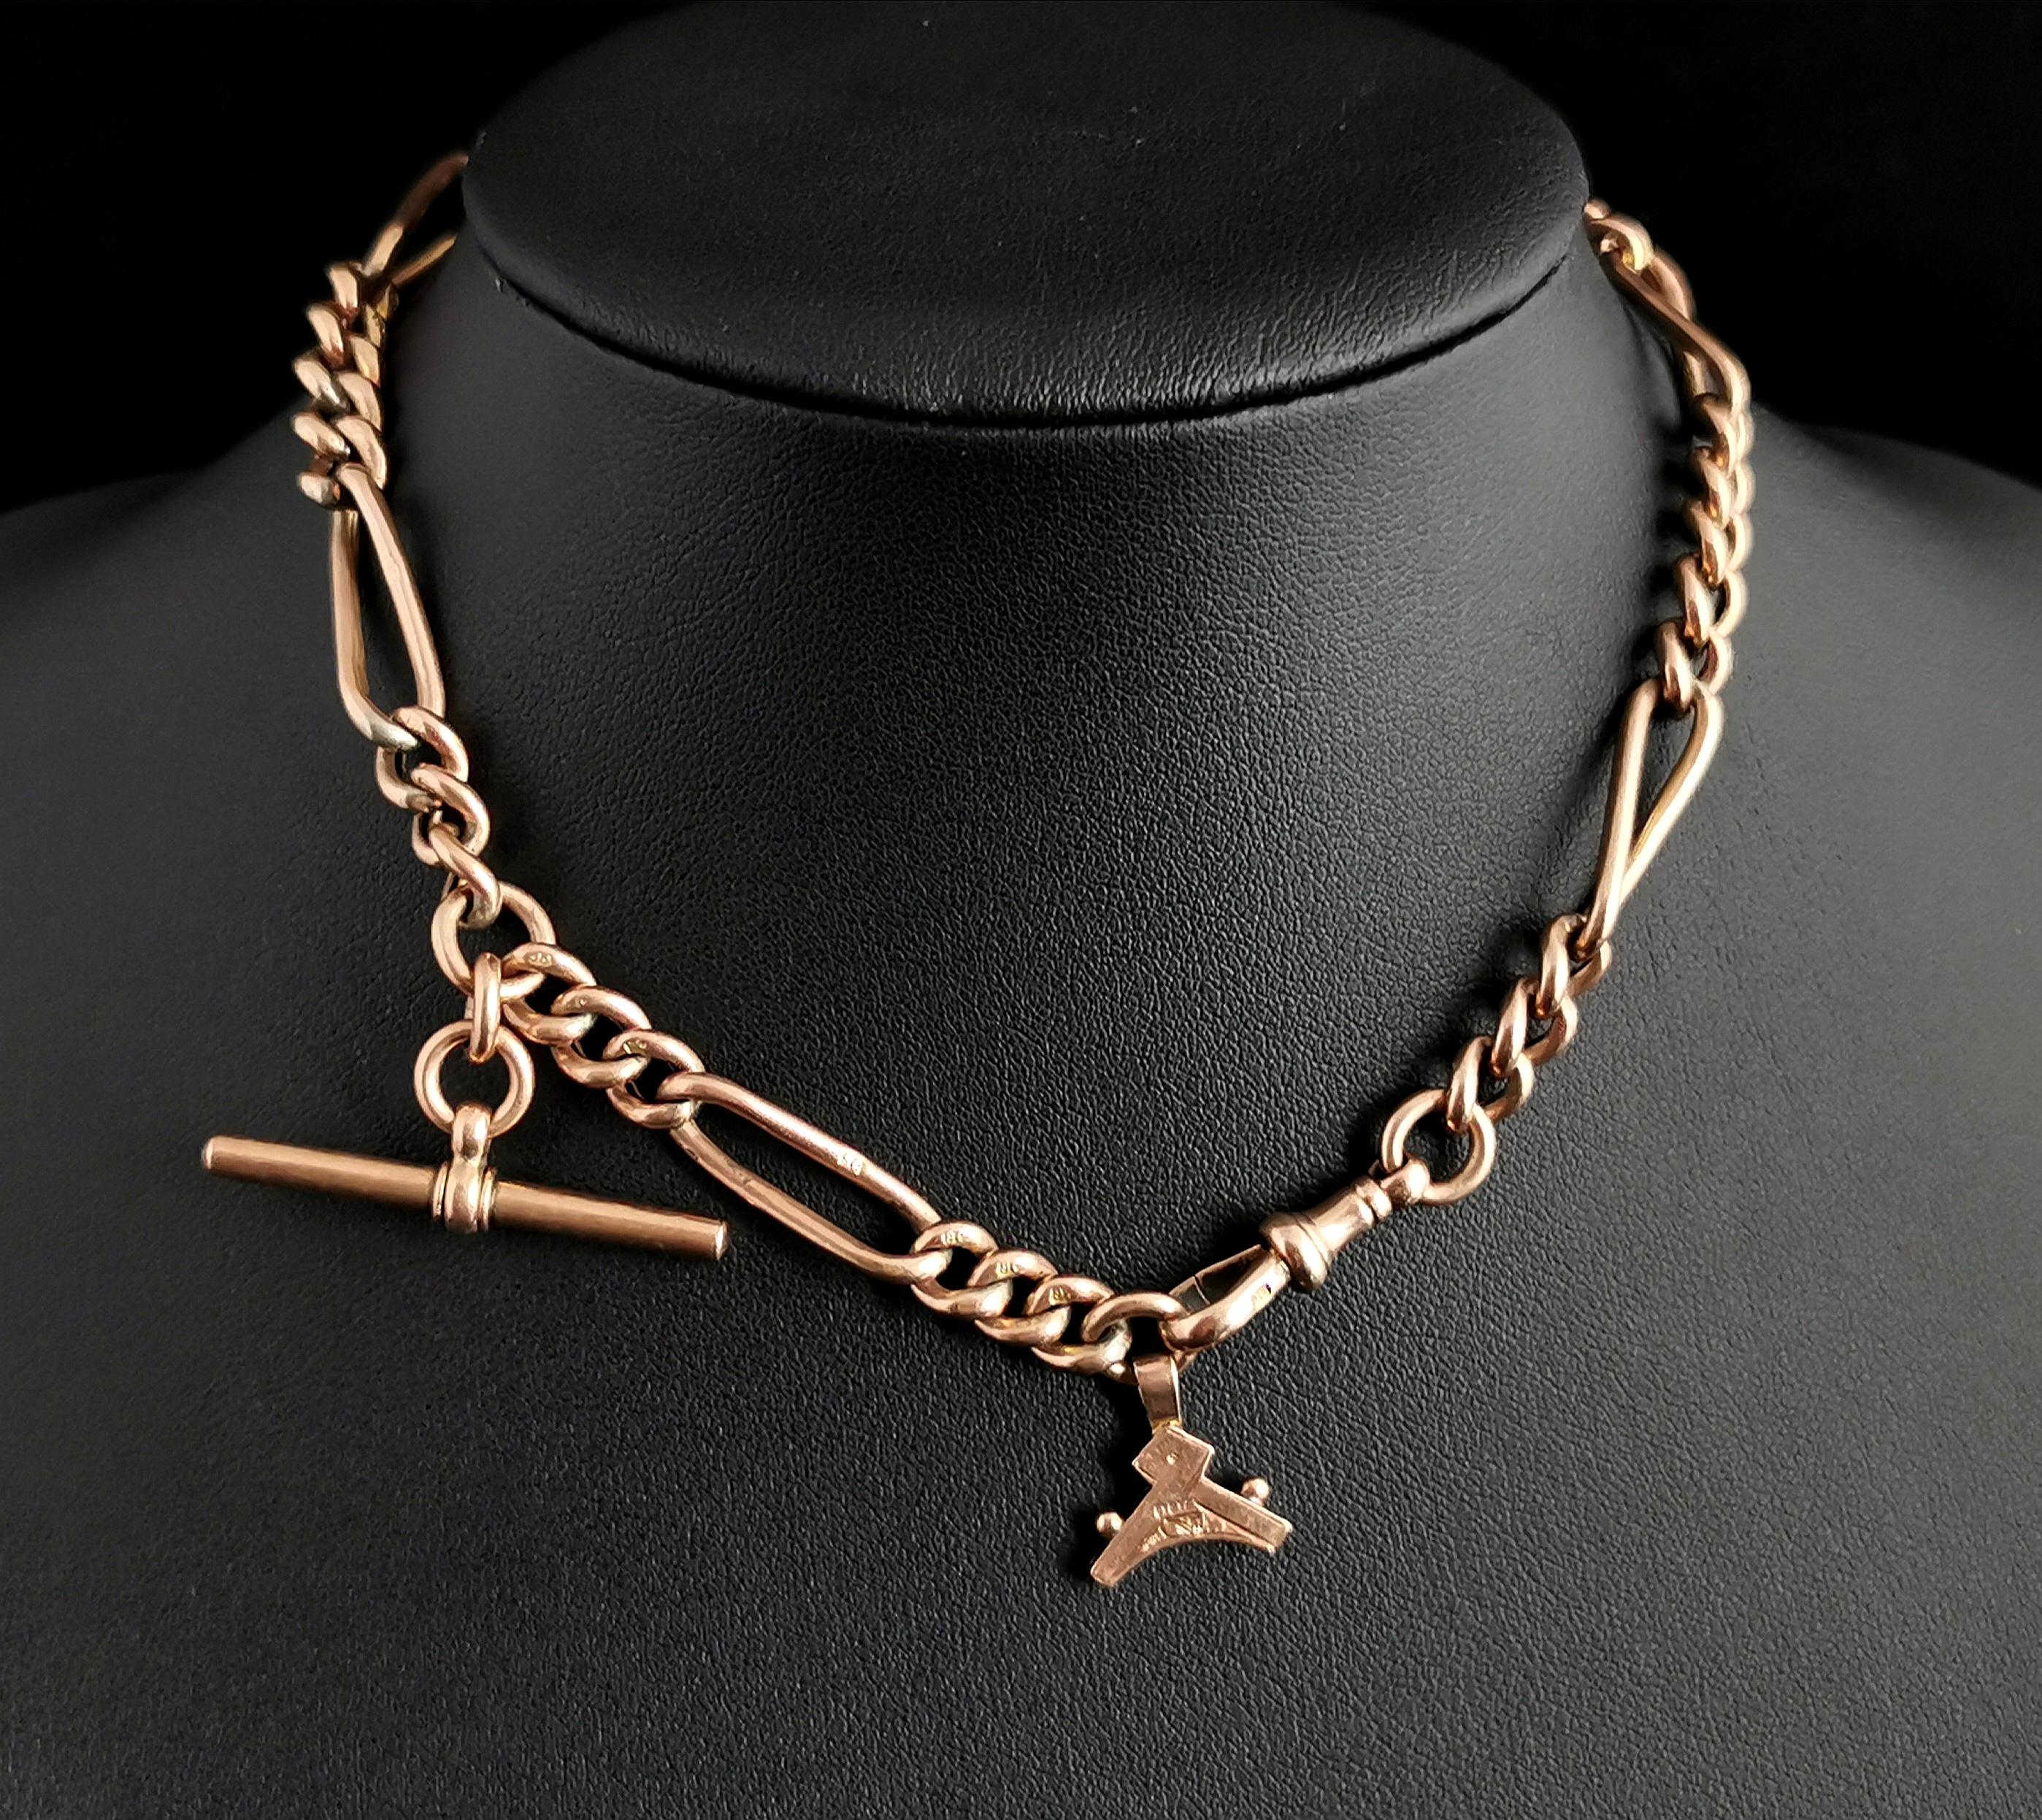 A handsome antique Edwardian era 9 karat Rose gold Albert chain or watch chain.

It has an attractive trombone link design with elongated paper clip links intercepted by short sections of curb link, each link is stamped 9c.

It has a gold t bar and